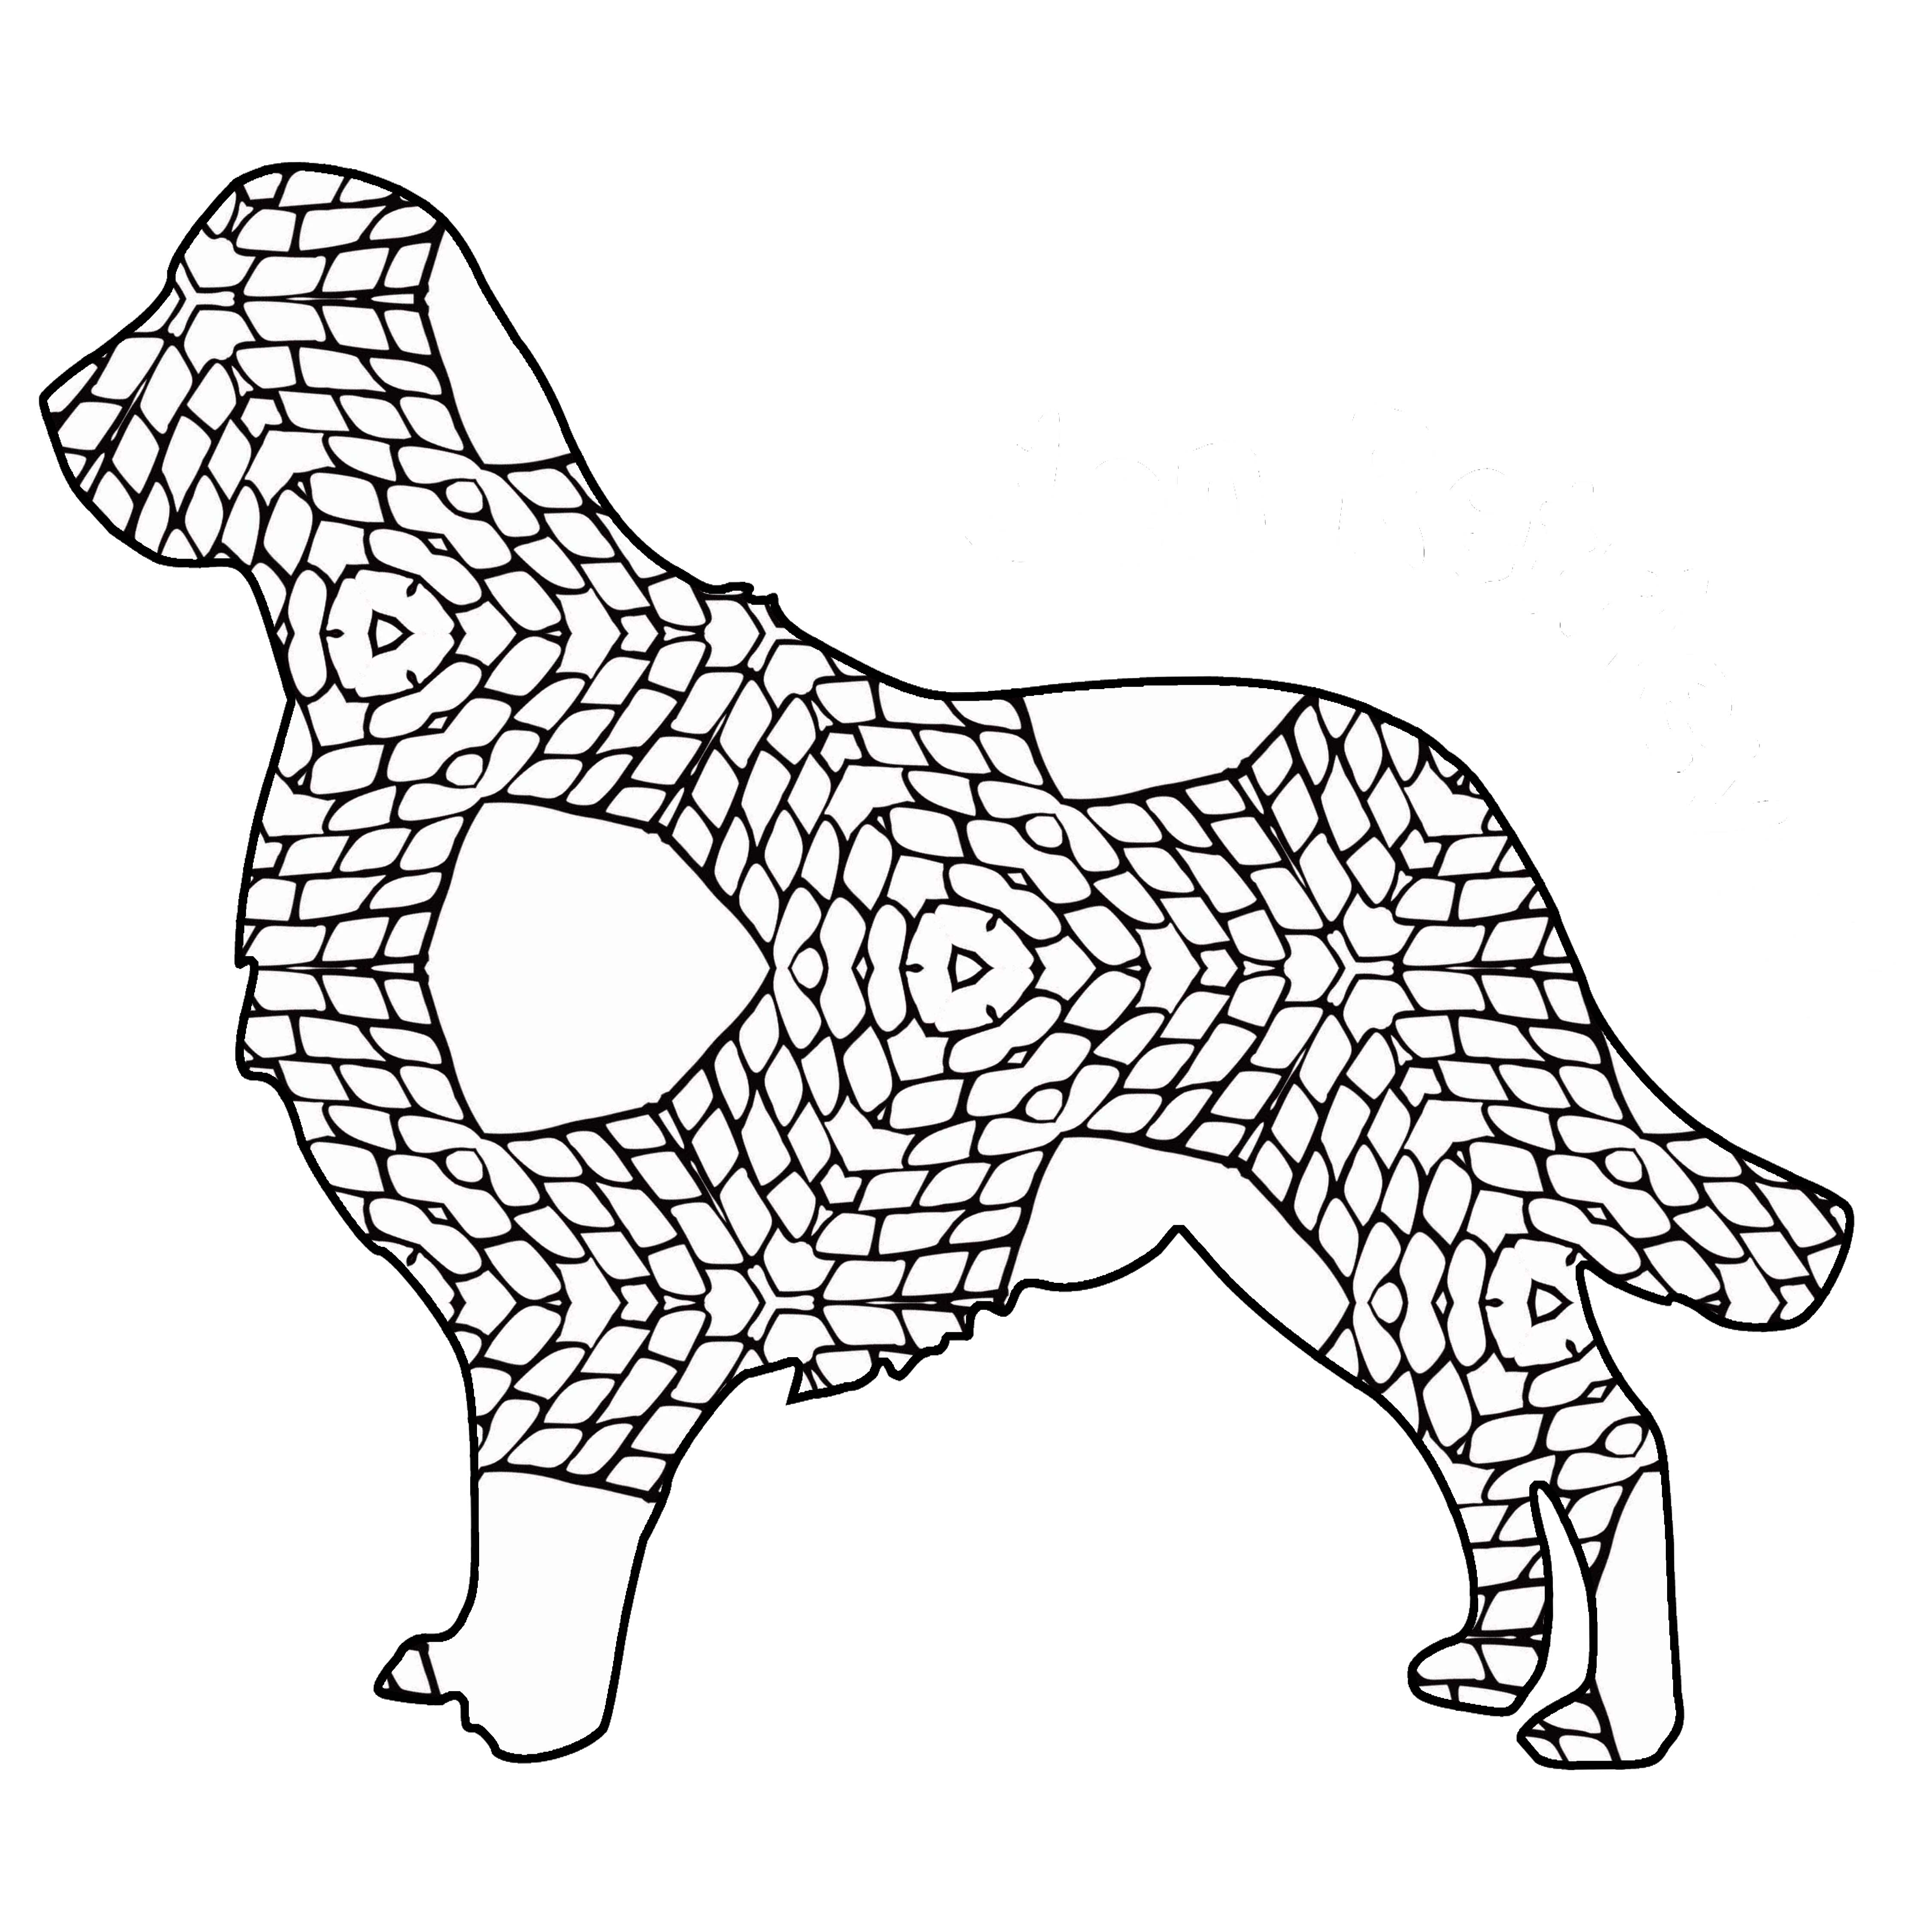 30 Free Printable Geometric Animal Coloring Pages | The ...